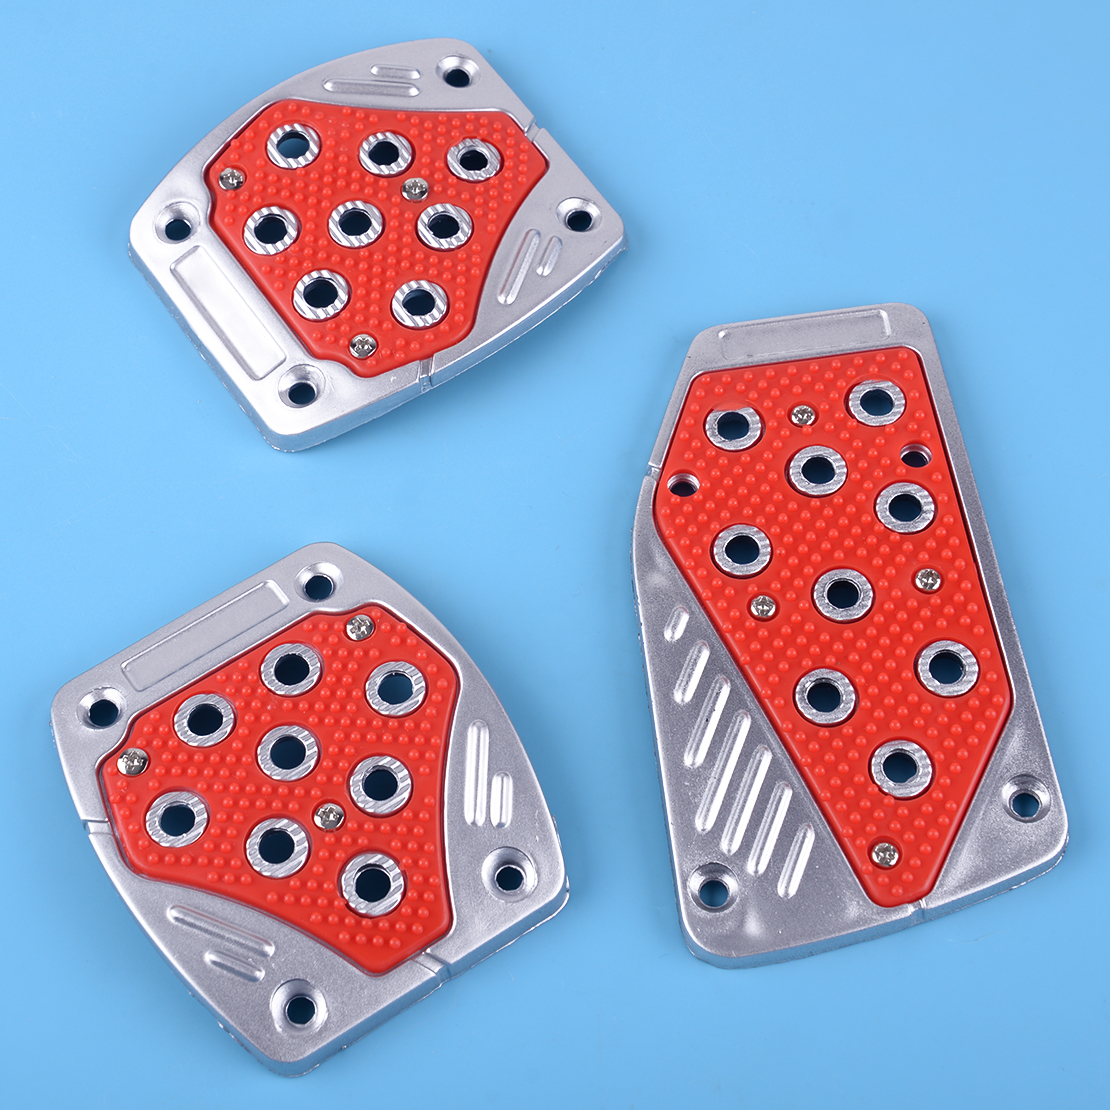 Pedal Pads Set of 3 Gas Brake Clutch Pedal Covers | eBay